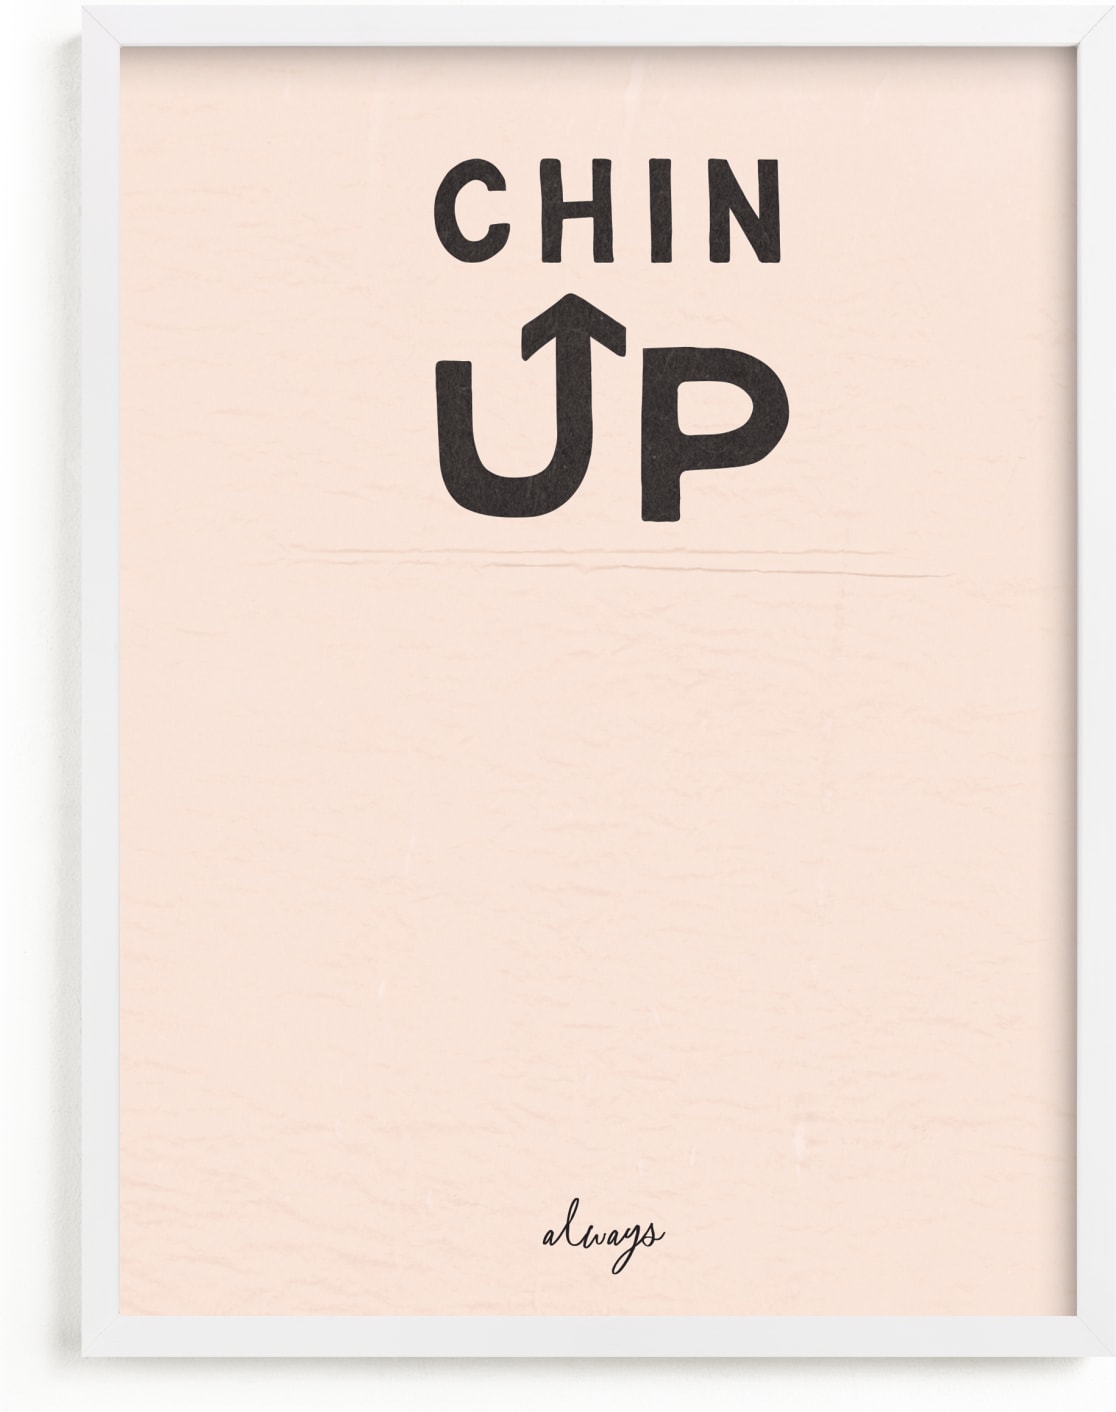 This is a pink art by Carrie ONeal called Chin Up.